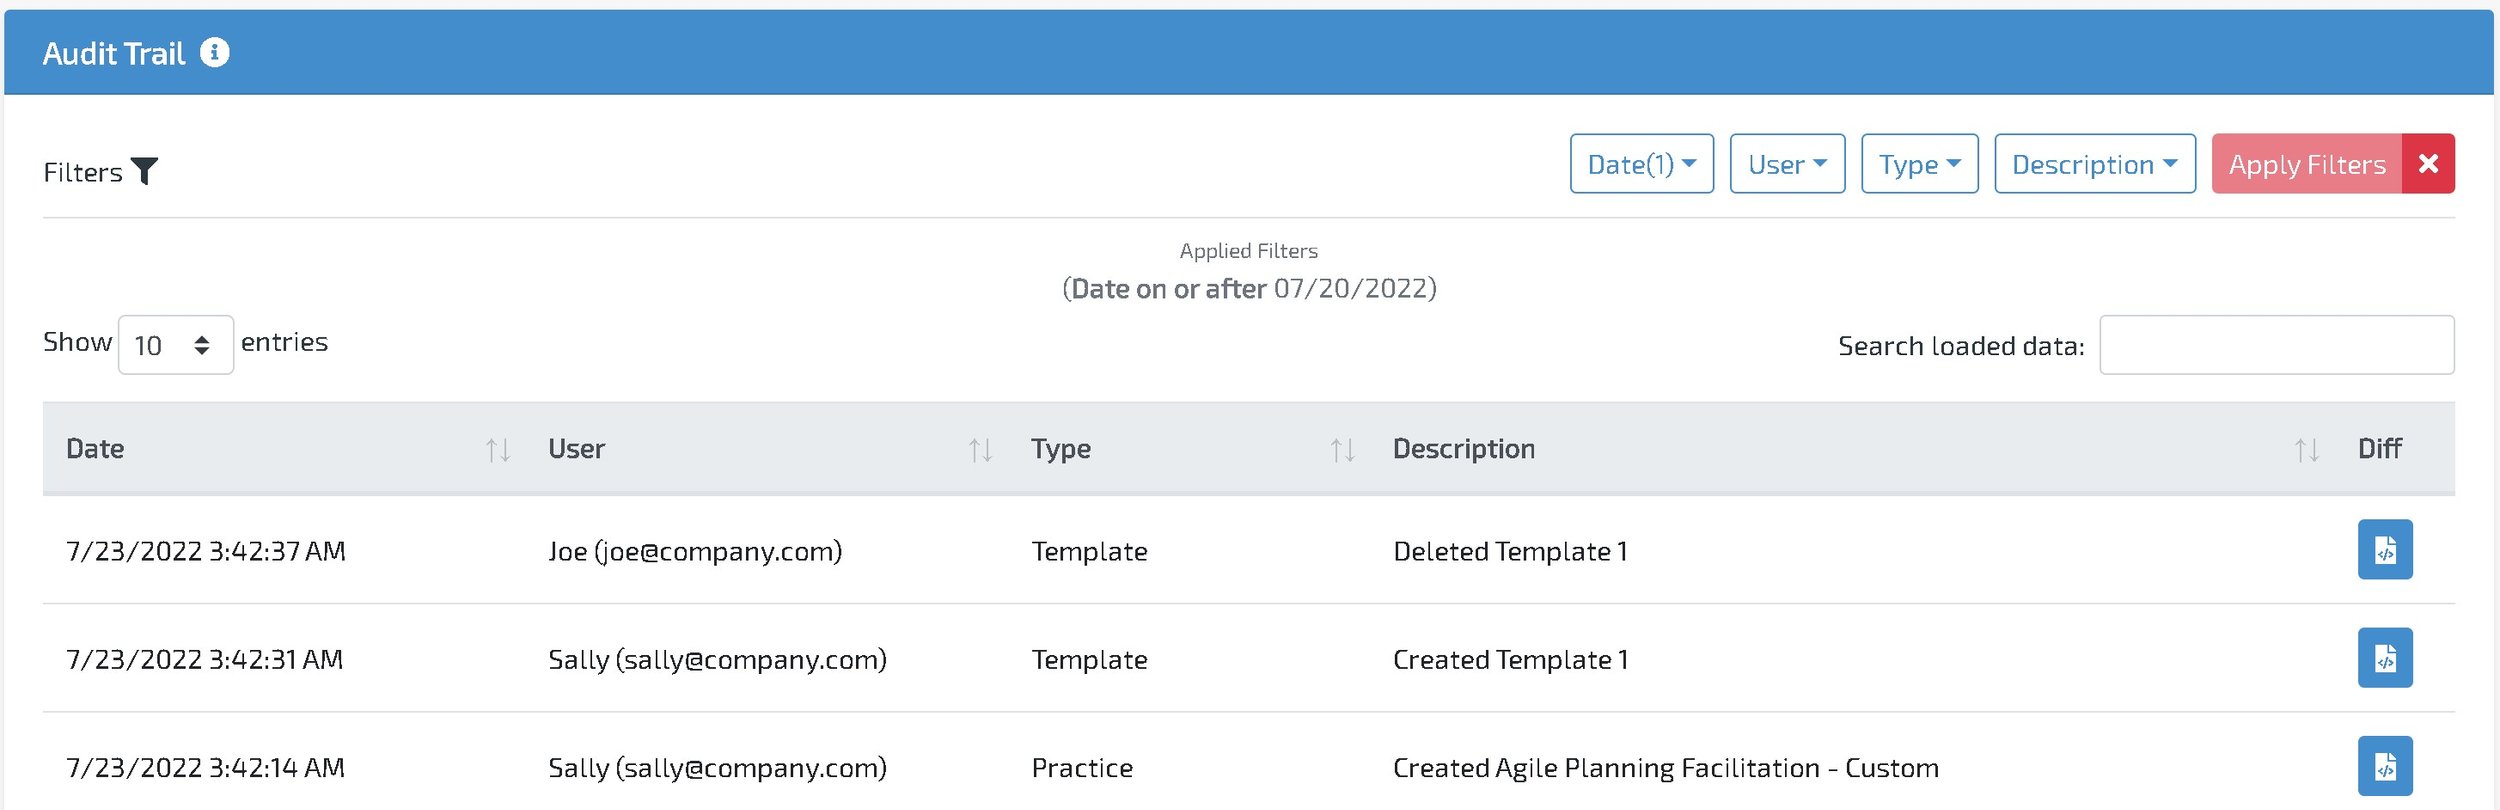 New Power Features - Audit Trail, Group Permissions, and more Template Customization